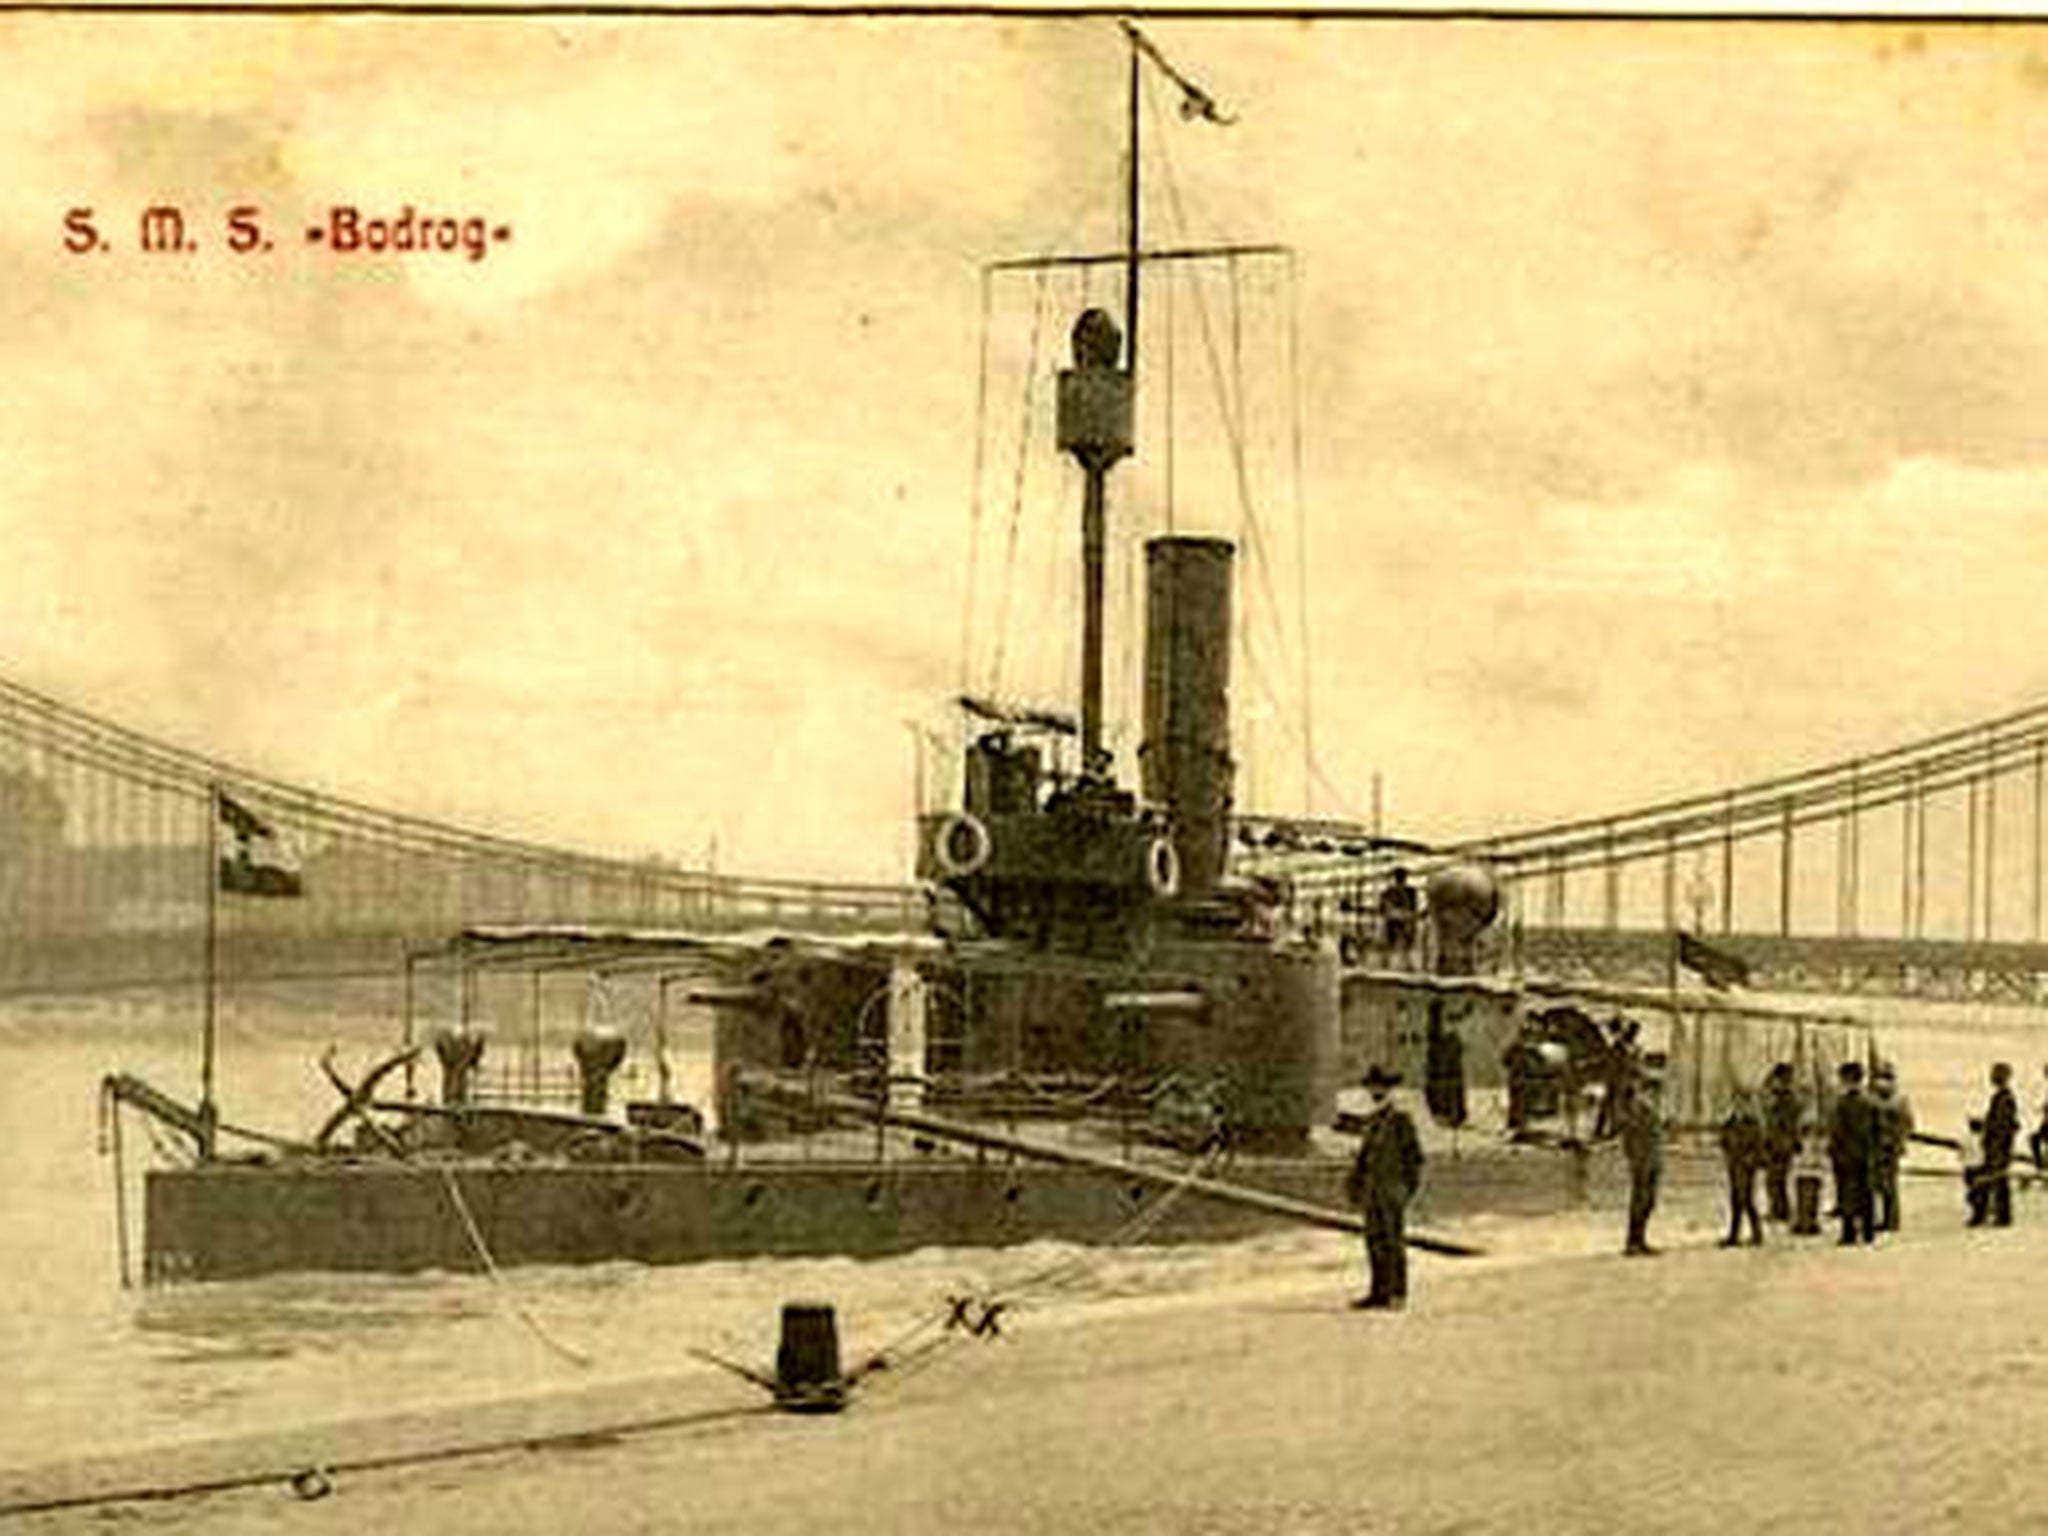 The Austro-Hungarian gunboat (the 'Bodrog') that fired the first shots of WW1 a century ago